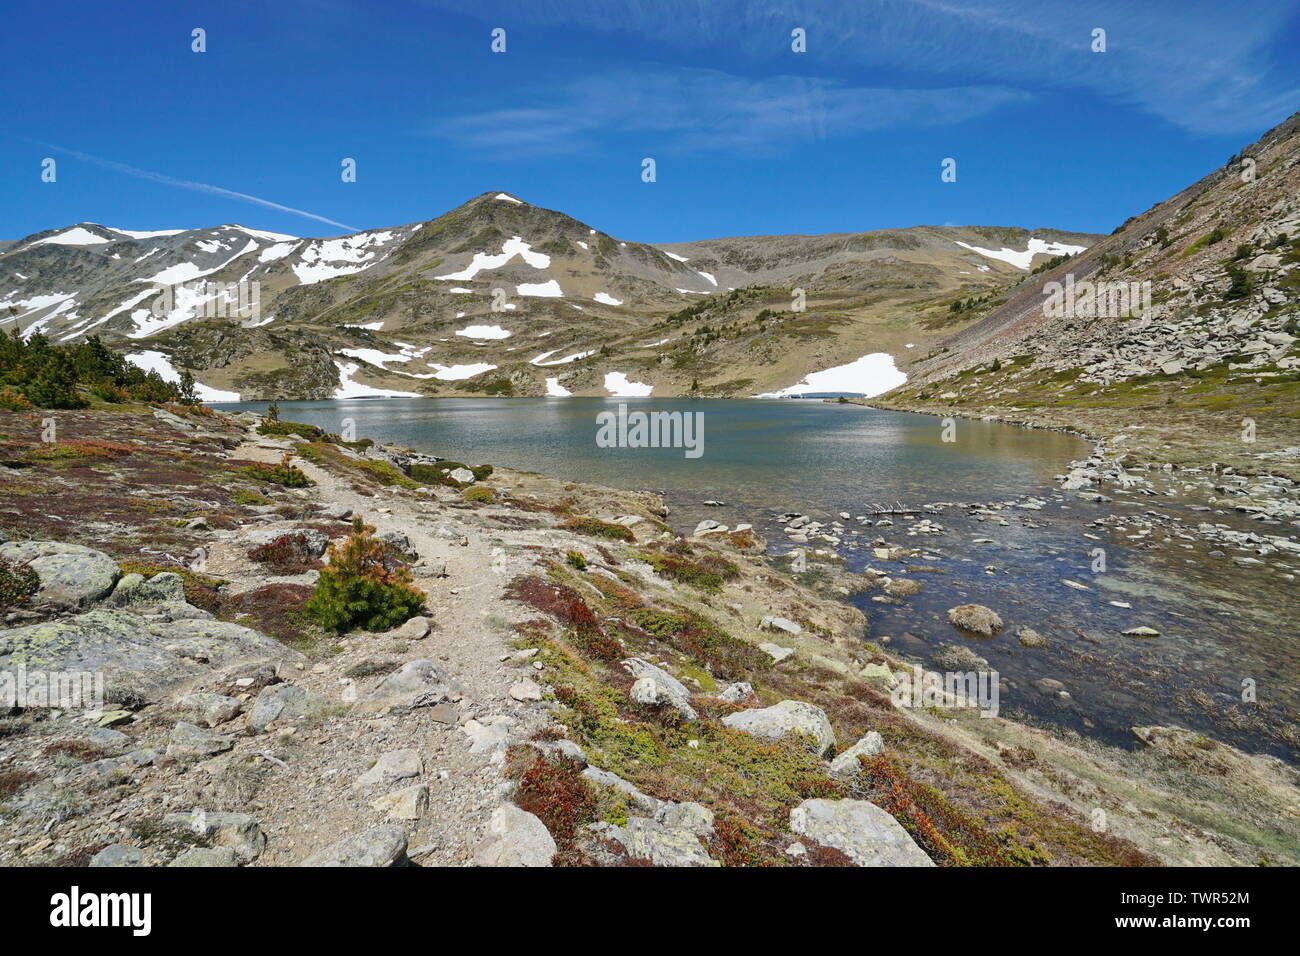 France mountain lake landscape in the Pyrenees, Casteilla, Pyrenees-Orientales Stock Photo